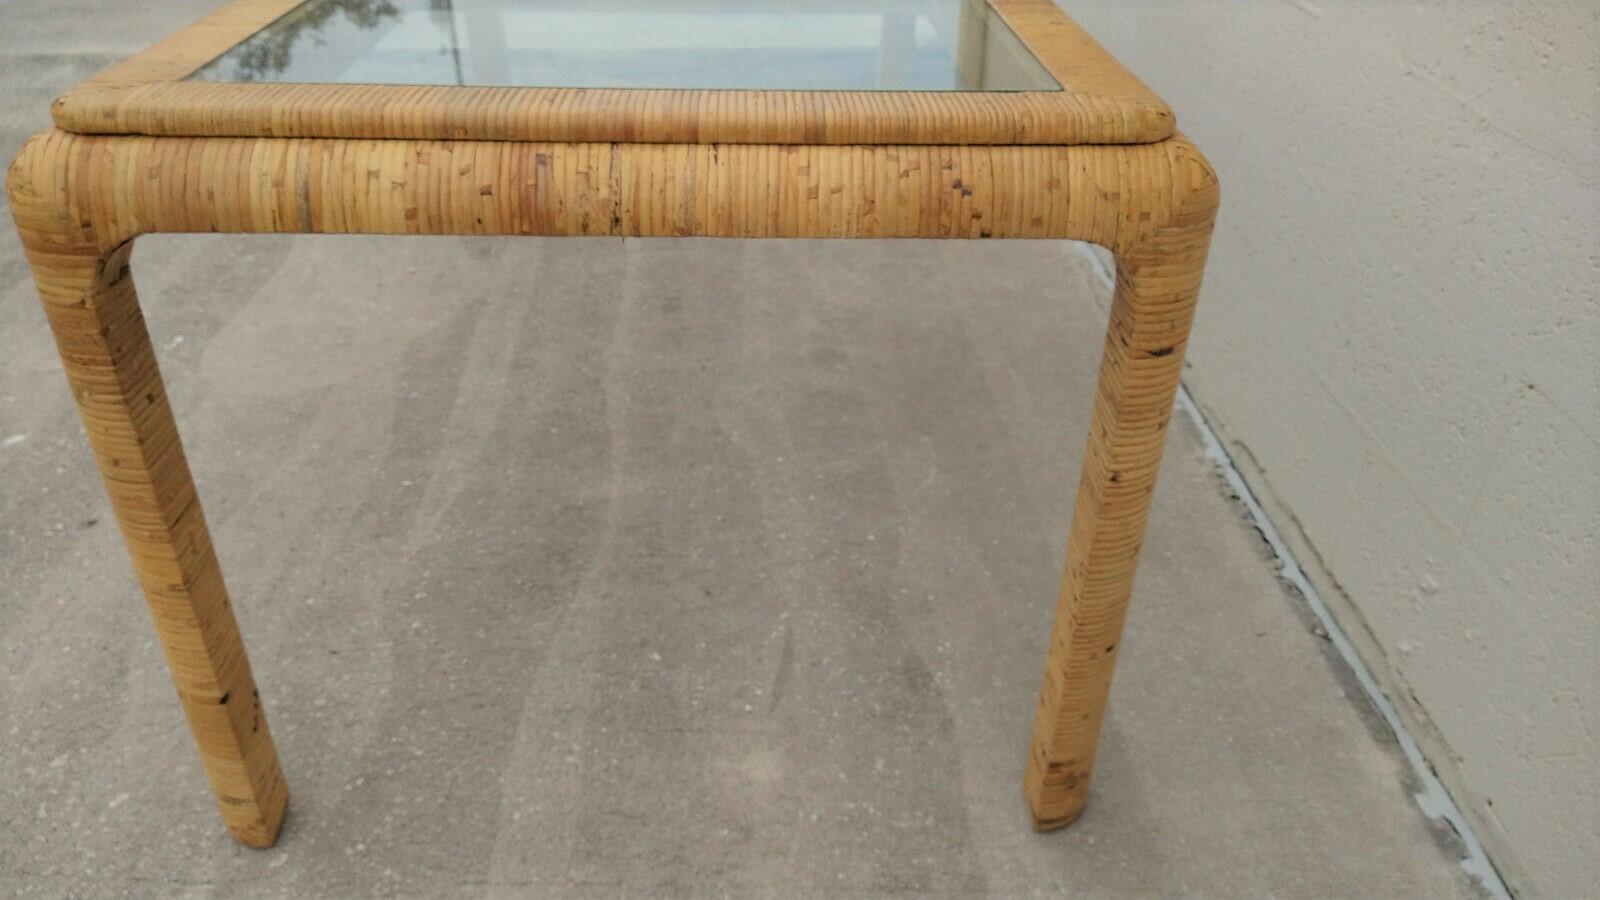 Unknown Rattan Wrapped Waterfall Dining Table with Extension Leaf, Seats 6 to 8 For Sale